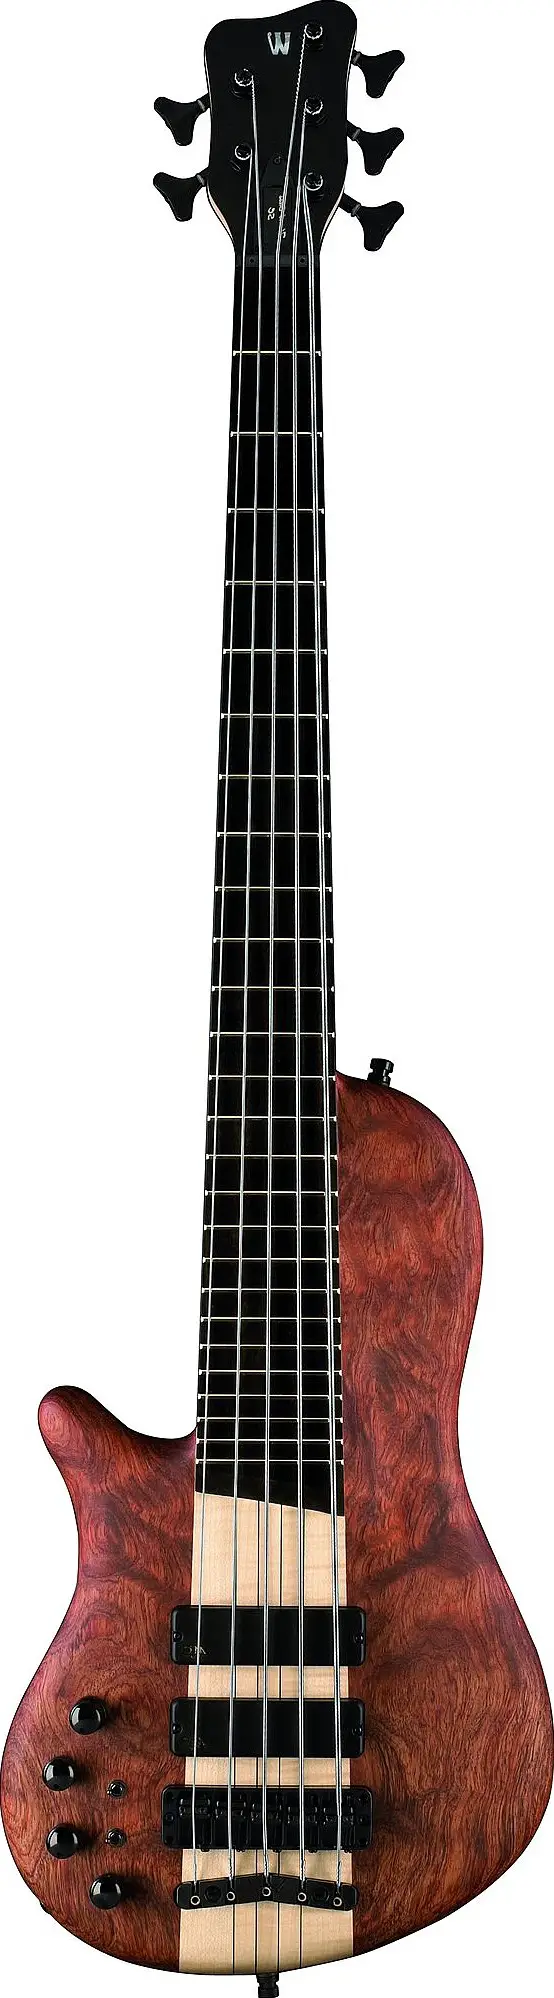 Thumb SC 5 Broadneck Left Handed by Warwick